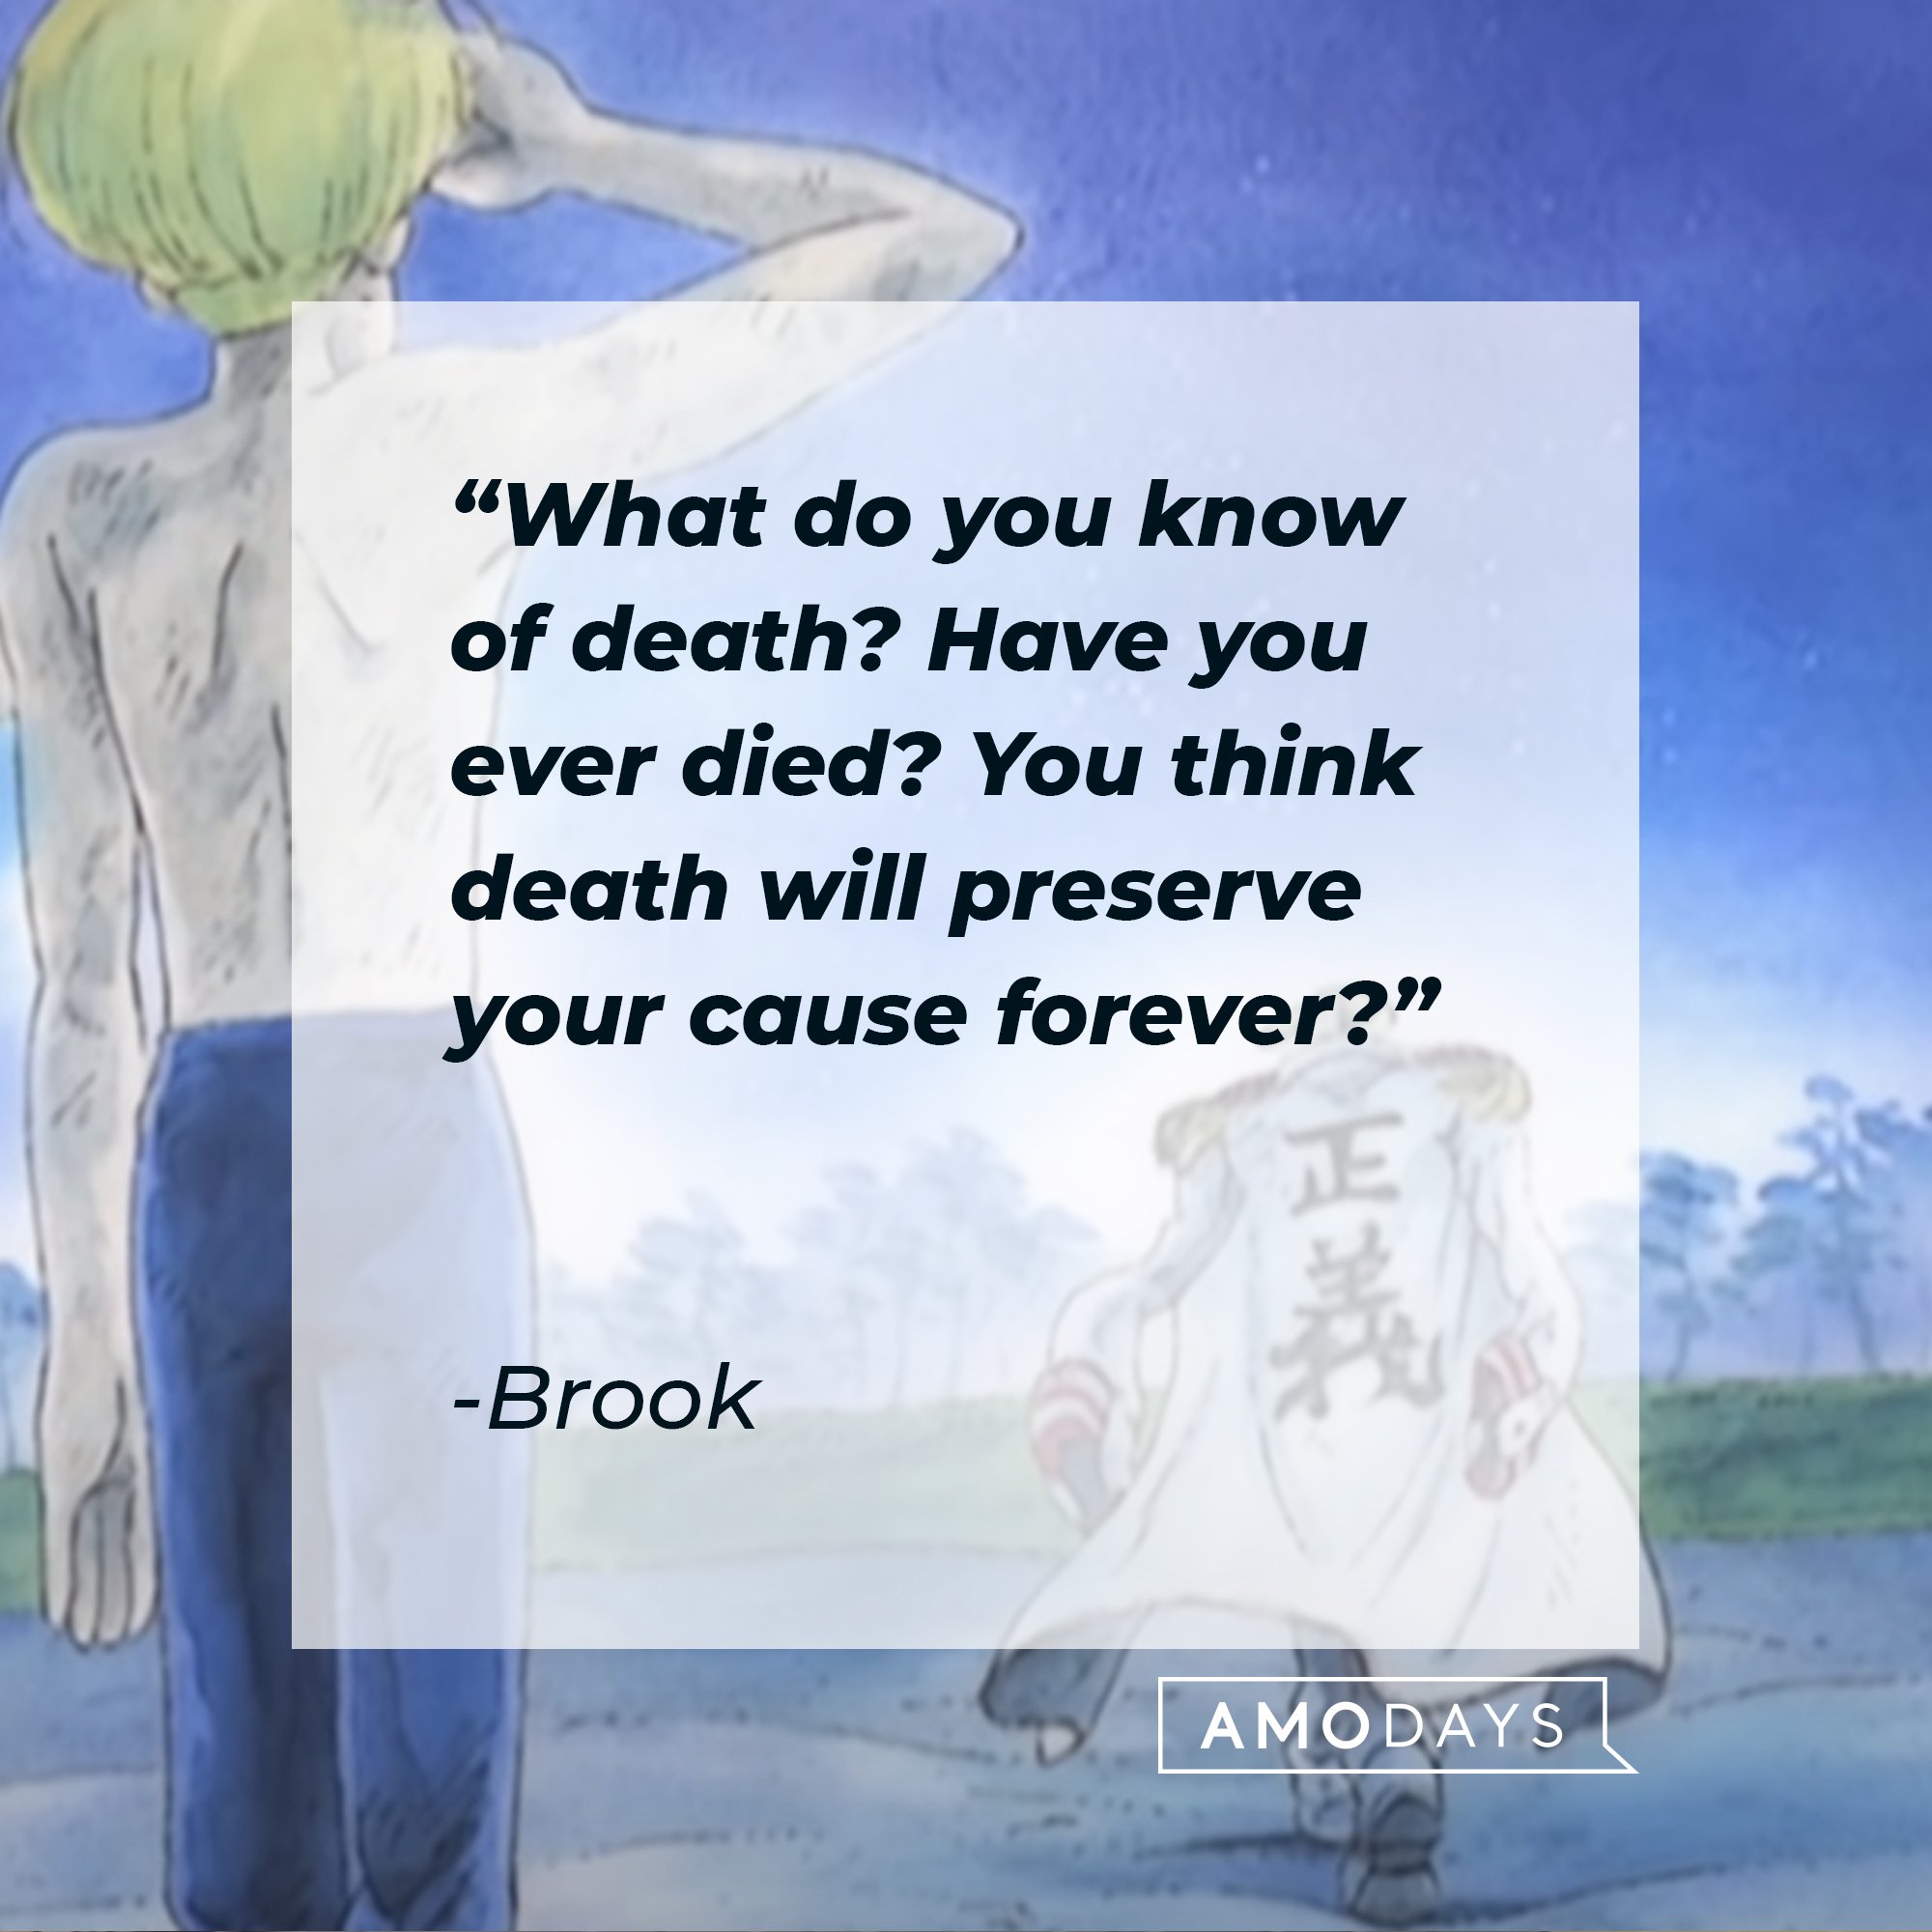 Brook's quote: "What do you know of death? Have you ever died? You think death will preserve your cause forever? Ridiculous!" | Image: AmoDays